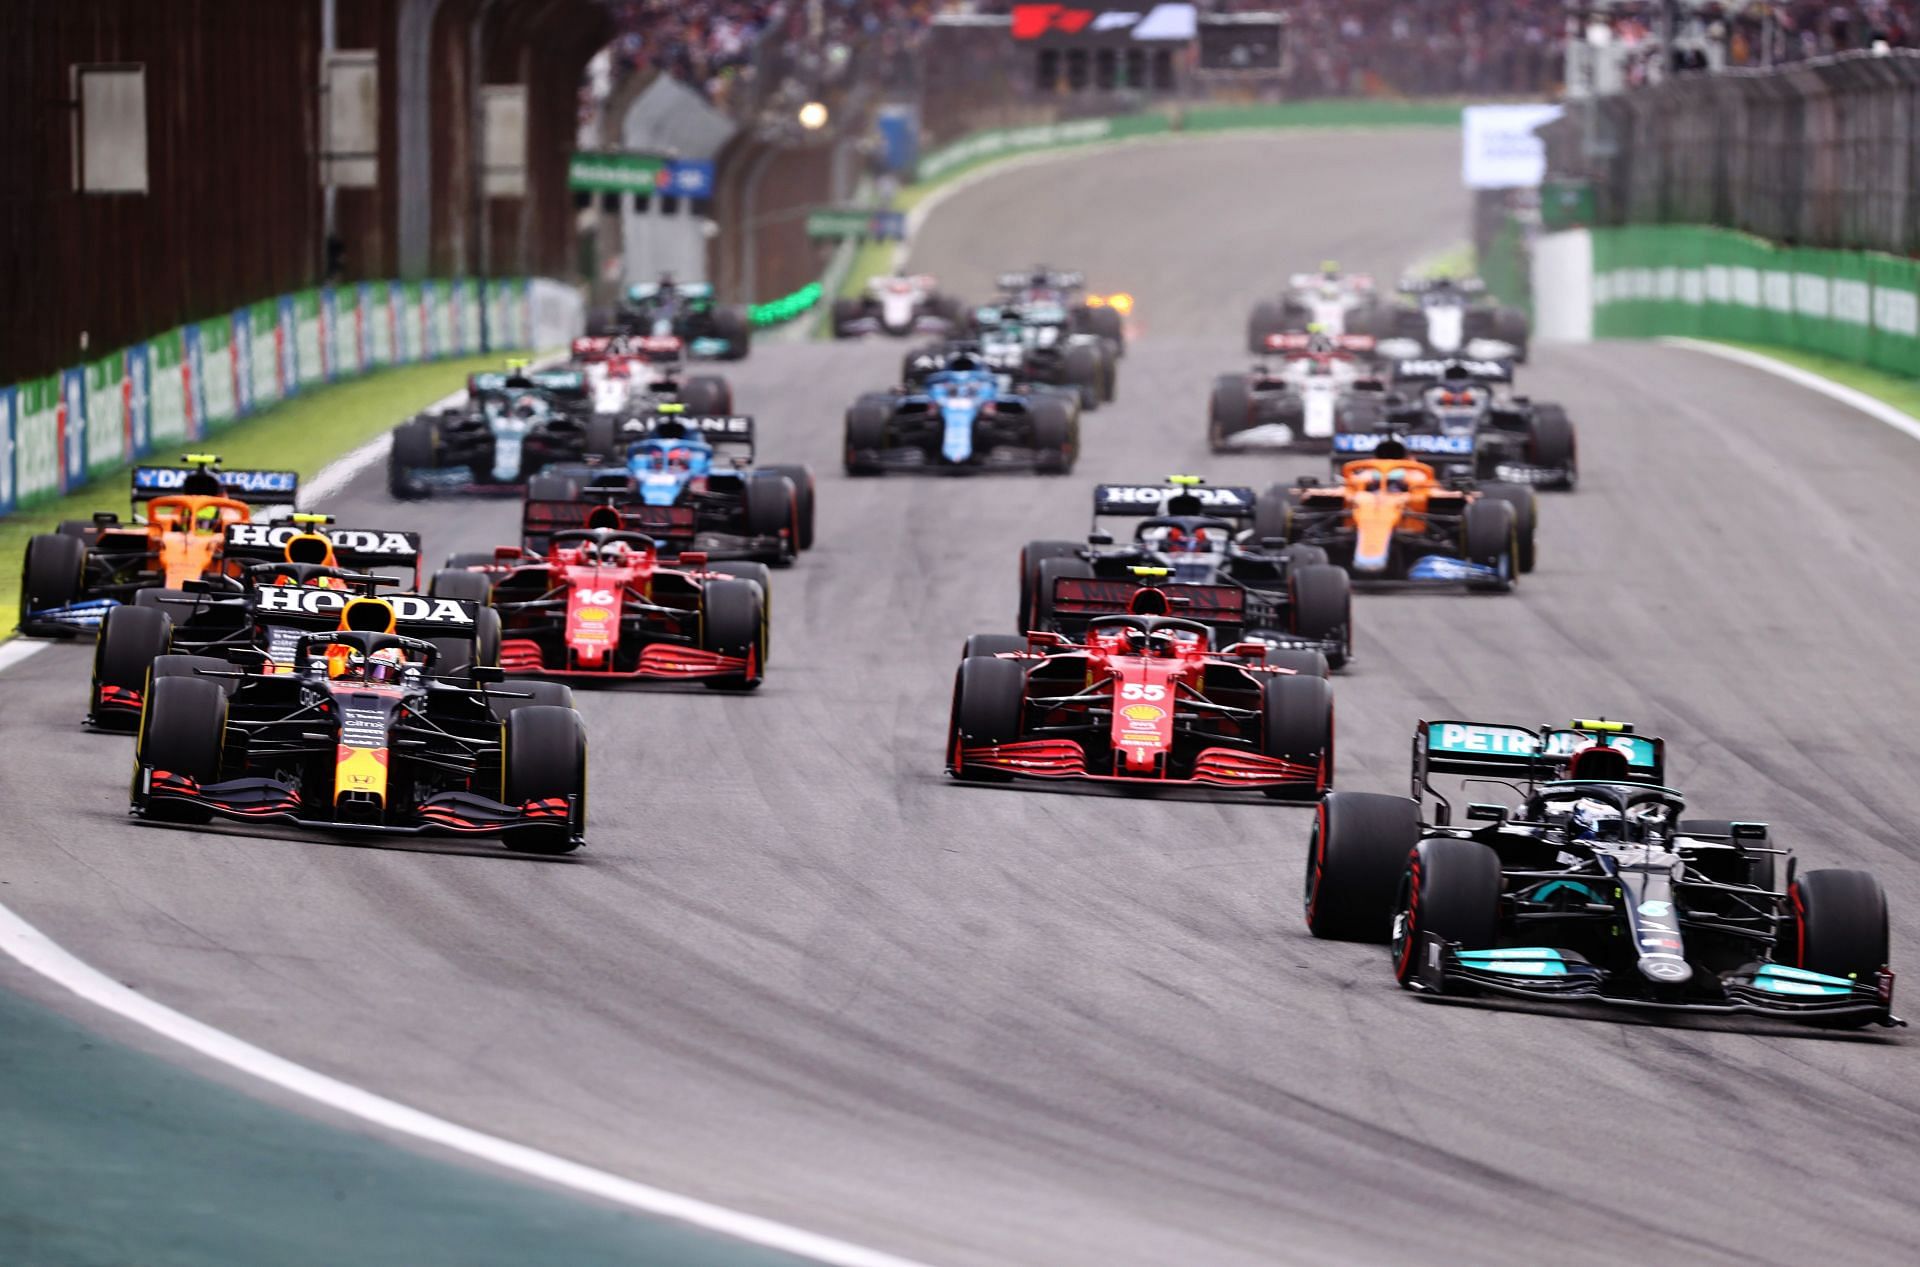 Valtteri Bottas of Finland leads Max Verstappen and the rest of the field into turn one at the start of the 2021 Brazil Grand Prix sprint race. (Photo by Lars Baron/Getty Images)